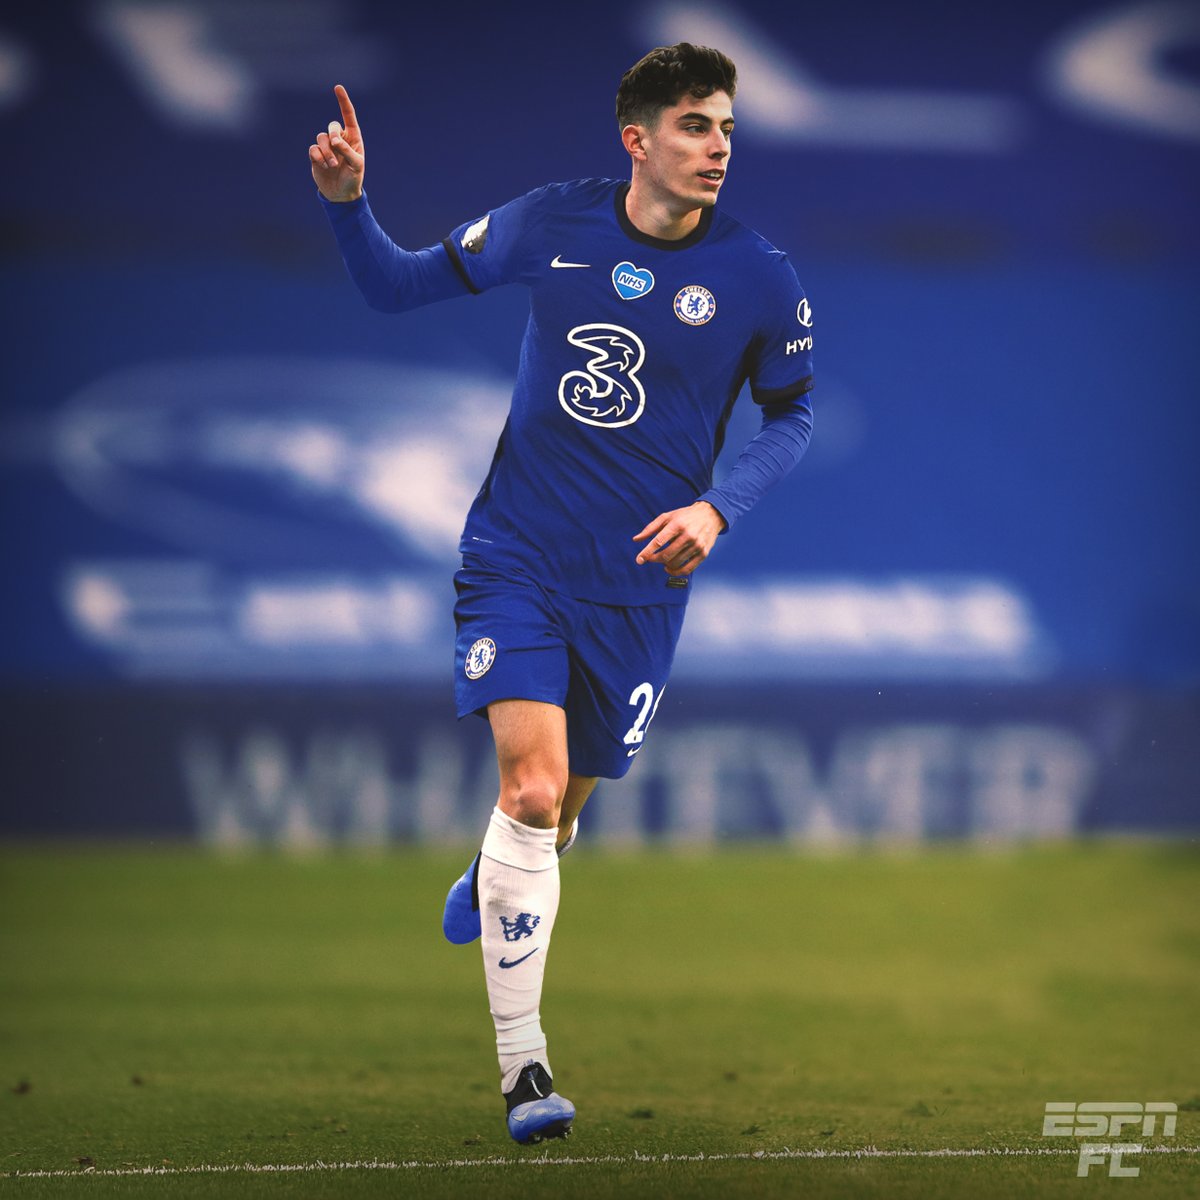 Chelsea have confirmed the signing of Kai Havertz.